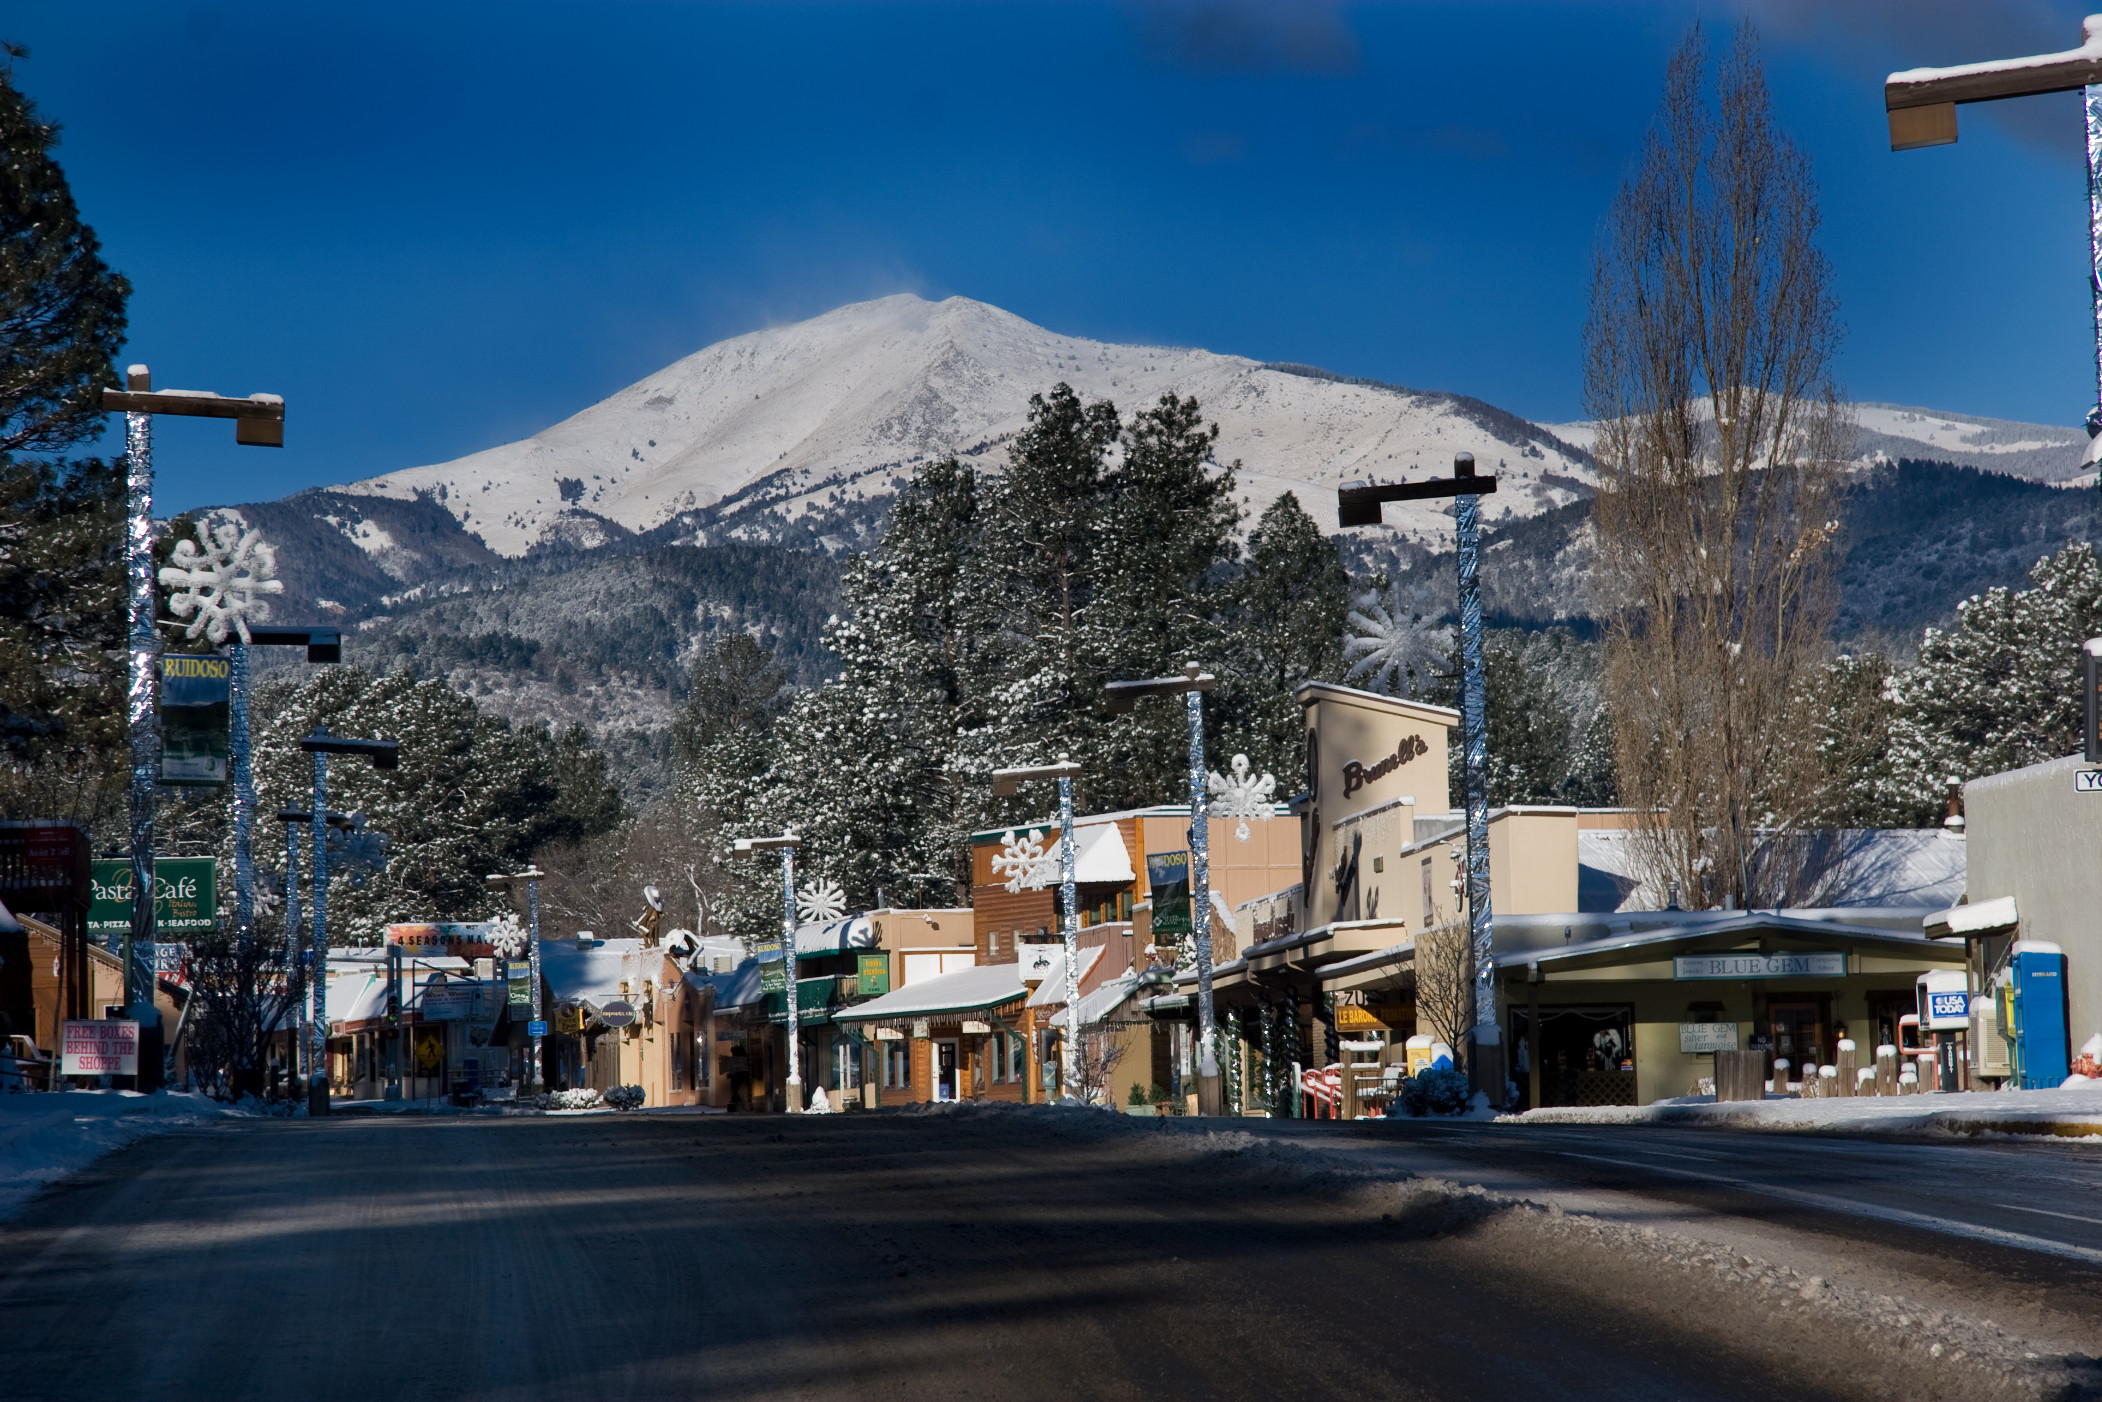 Downtown Ruidoso, New Mexico, Photo by Kerry Gladden (The Agency)